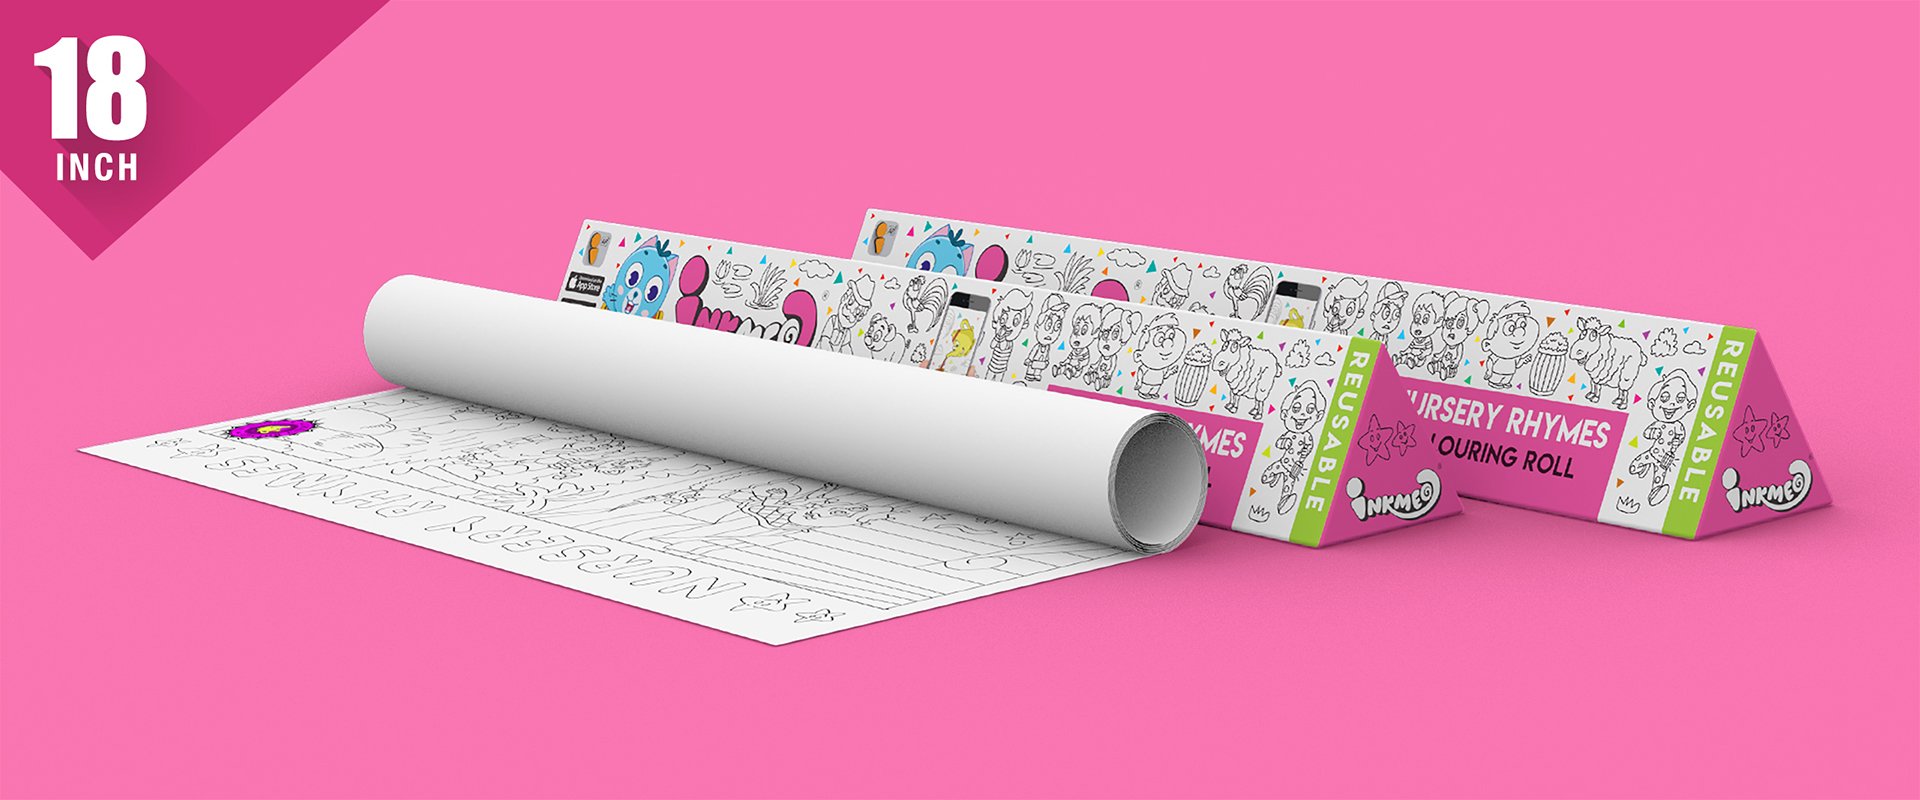 The image shows a pink background with two triangular boxes, one of which has paper rolled out.